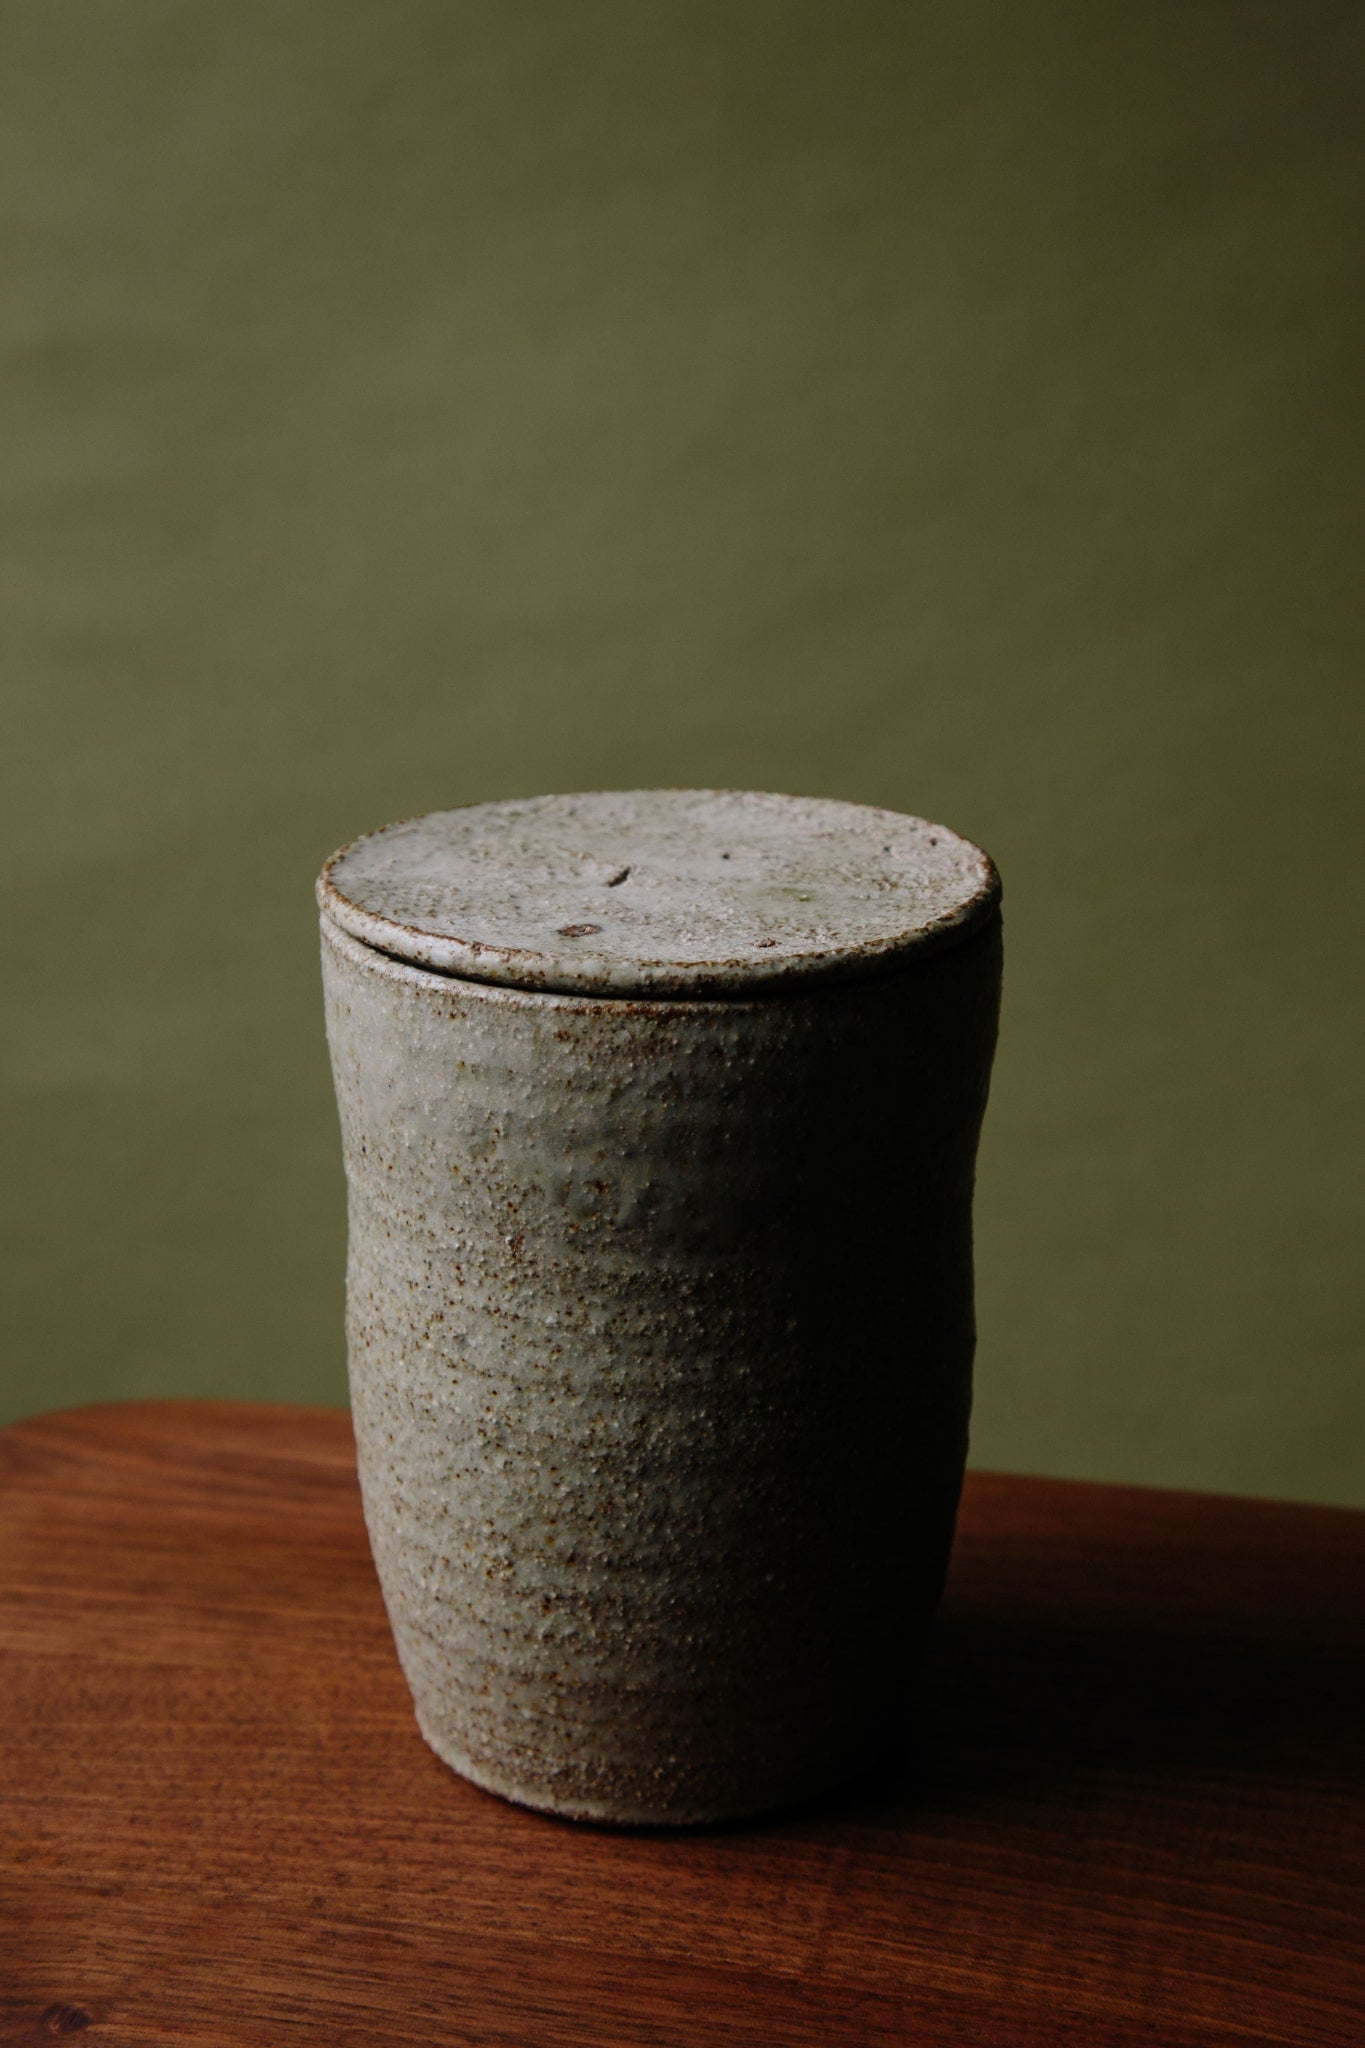 ALT=A third angle of the ceramic jar, this time with the lid on the jar. The concentric hand thrown lines can be seen and a dramatic shadow cast by the natural light coming in from the left.